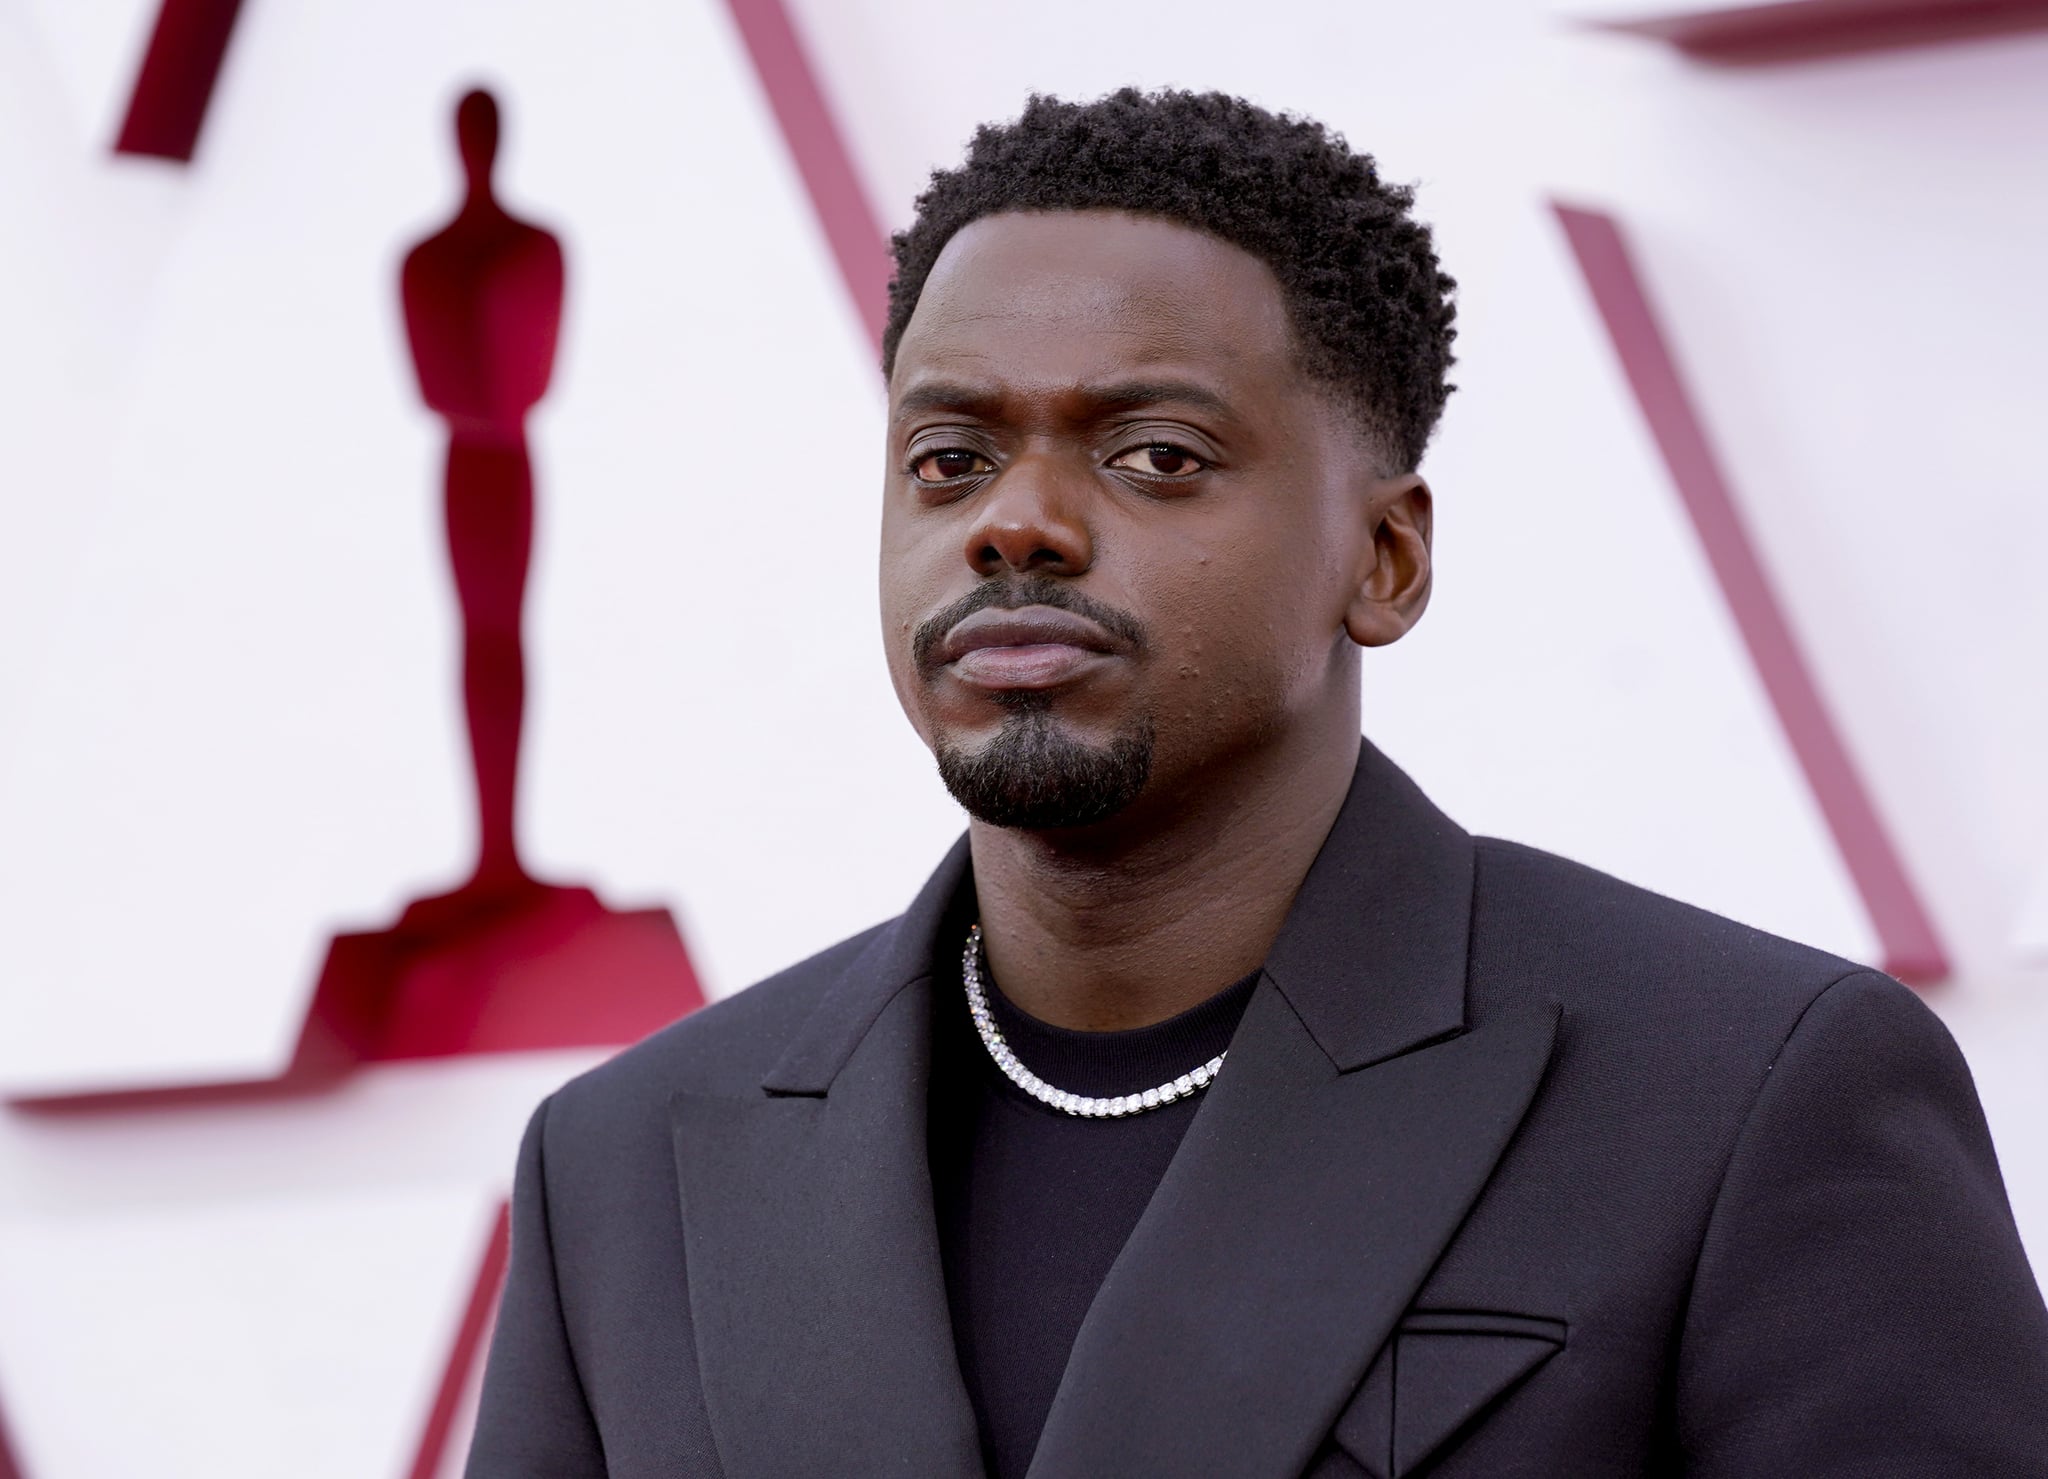 LOS ANGELES, CALIFORNIA – APRIL 25: Daniel Kaluuya attends the 93rd Annual Academy Awards at Union Station on April 25, 2021 in Los Angeles, California. (Photo by Chris Pizzello-Pool/Getty Images)